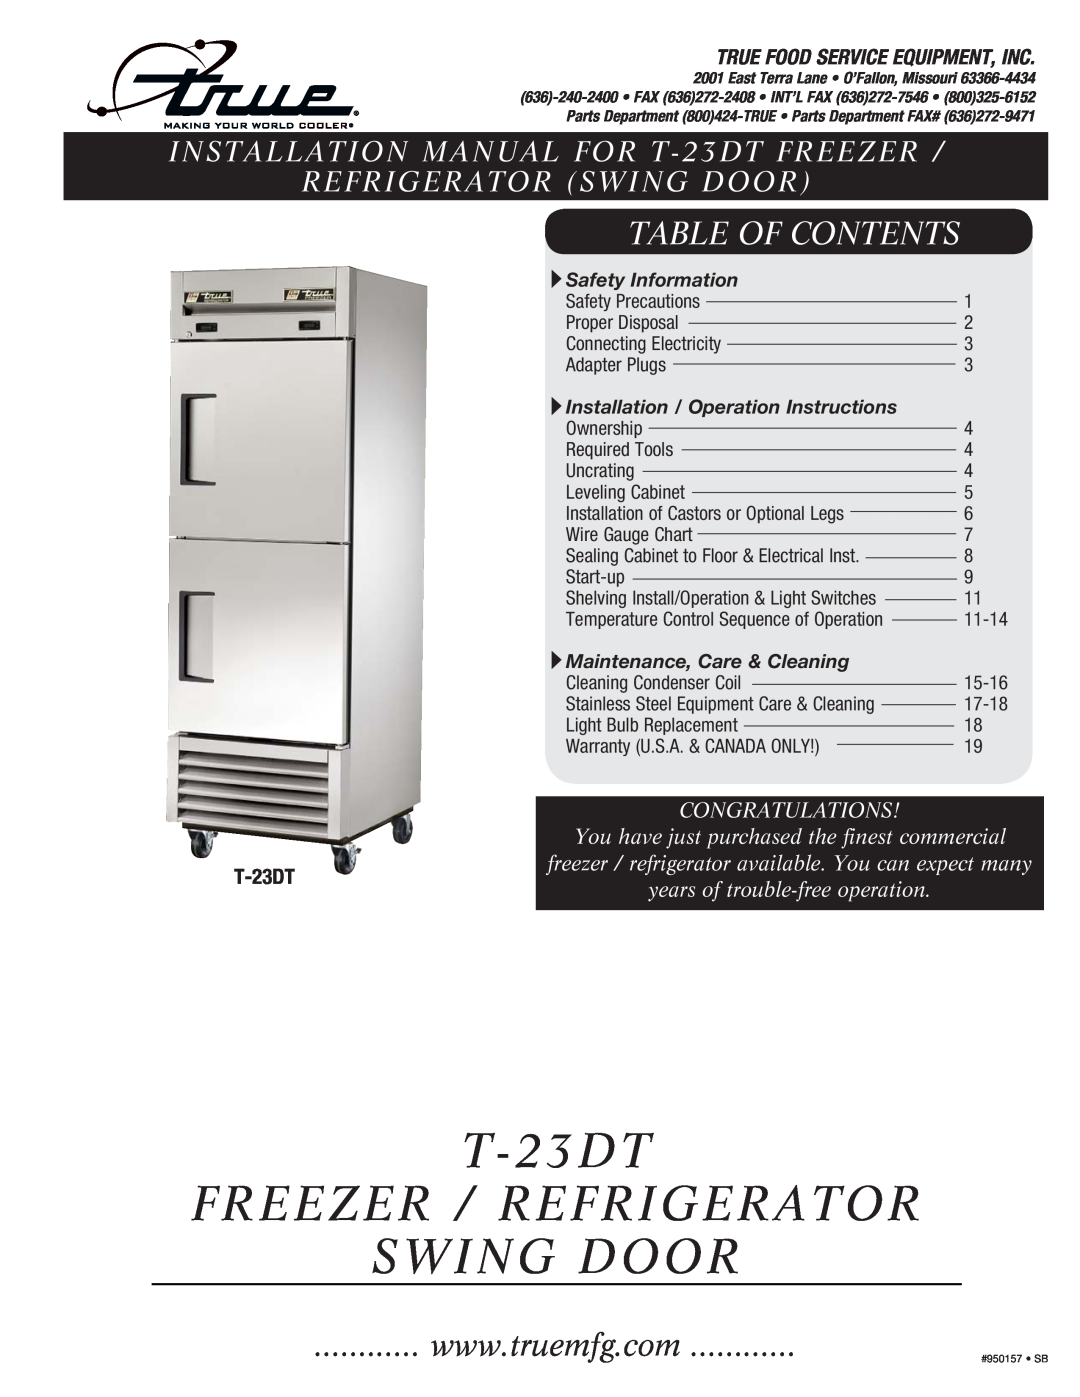 True Manufacturing Company installation manual T-23DT FREEZER / REFRIGERATOR SWING DOOR, Table Of Contents 